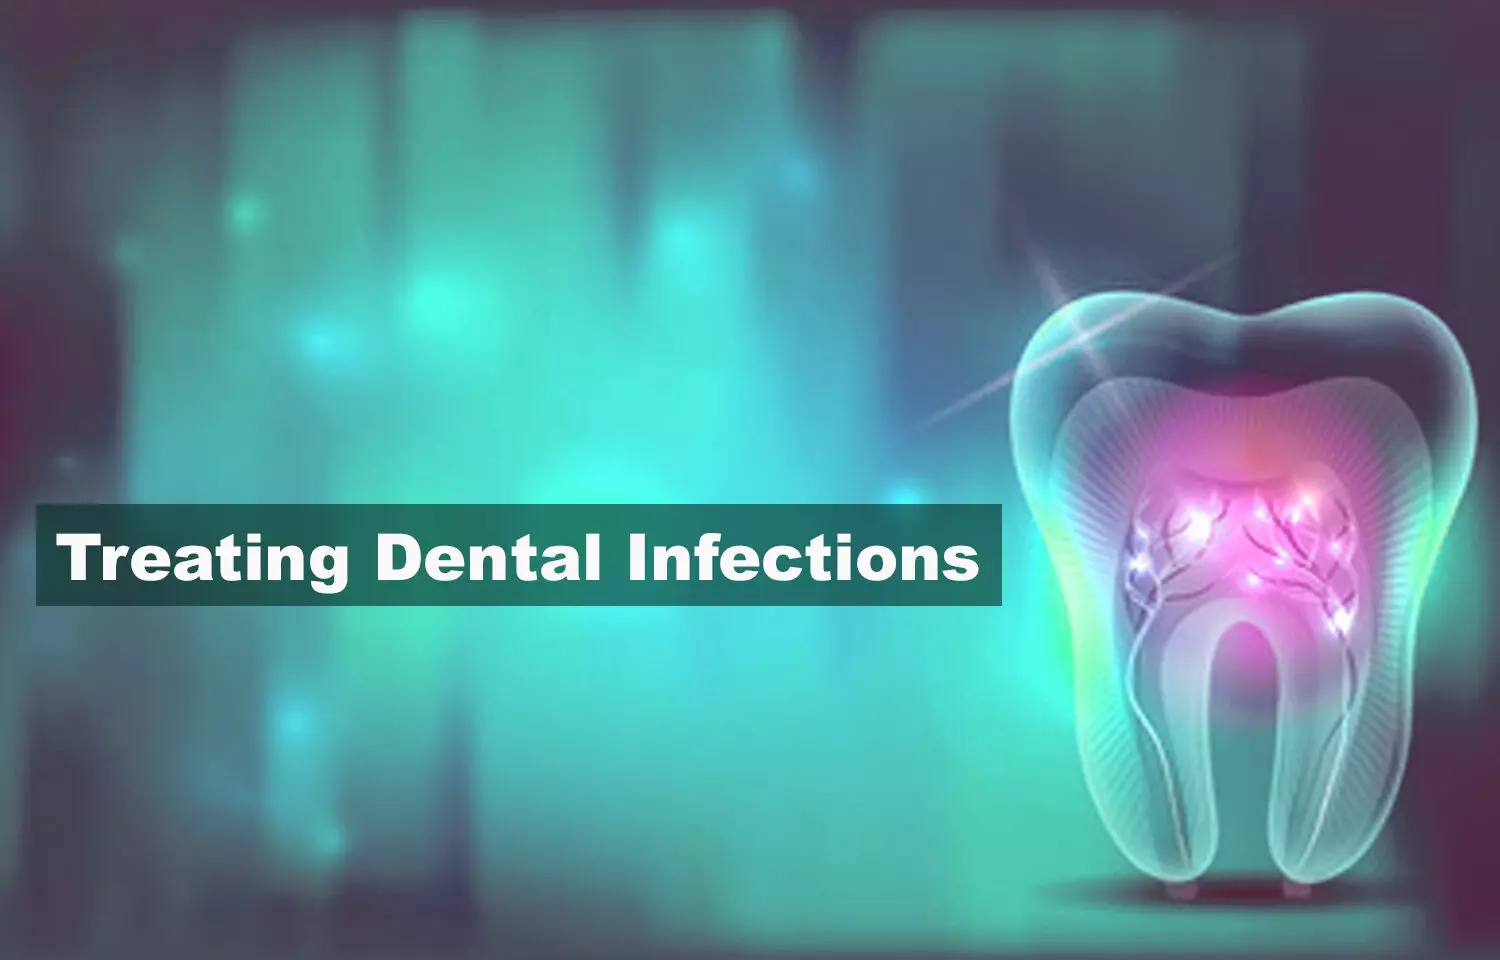 What should you consider as a first line of choice in dental infections?